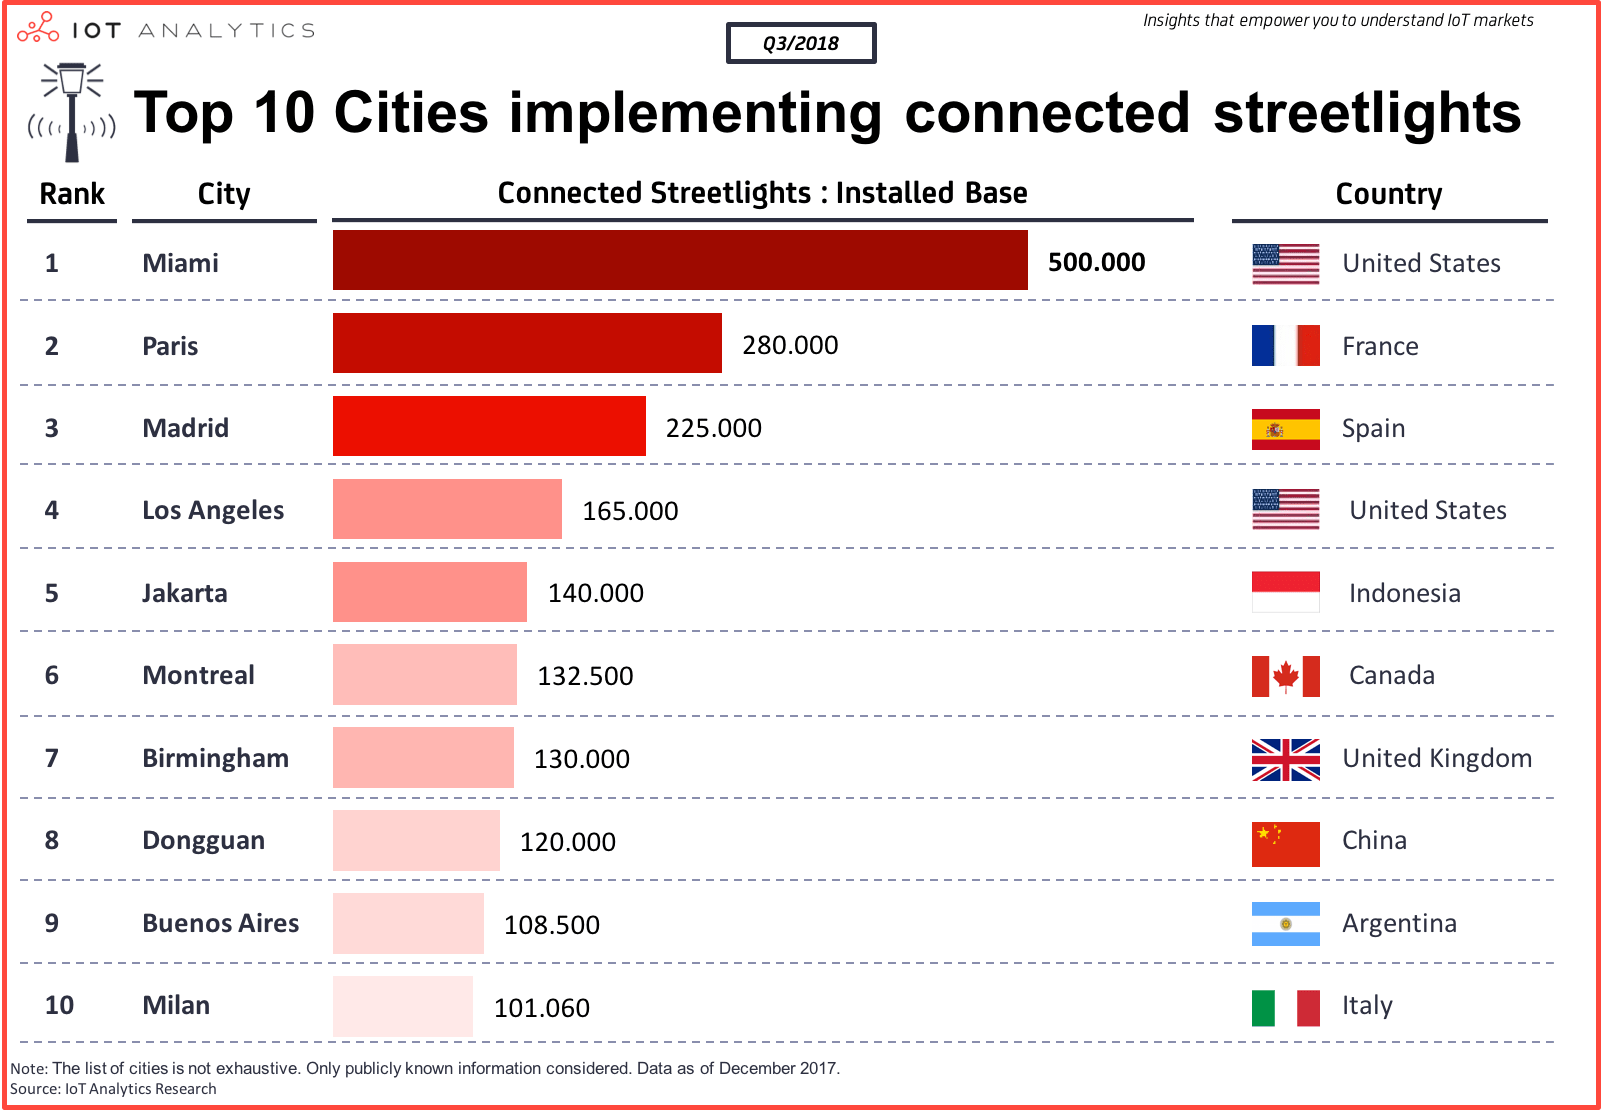 The Top 10 Cities Implementing Connected Streetlights